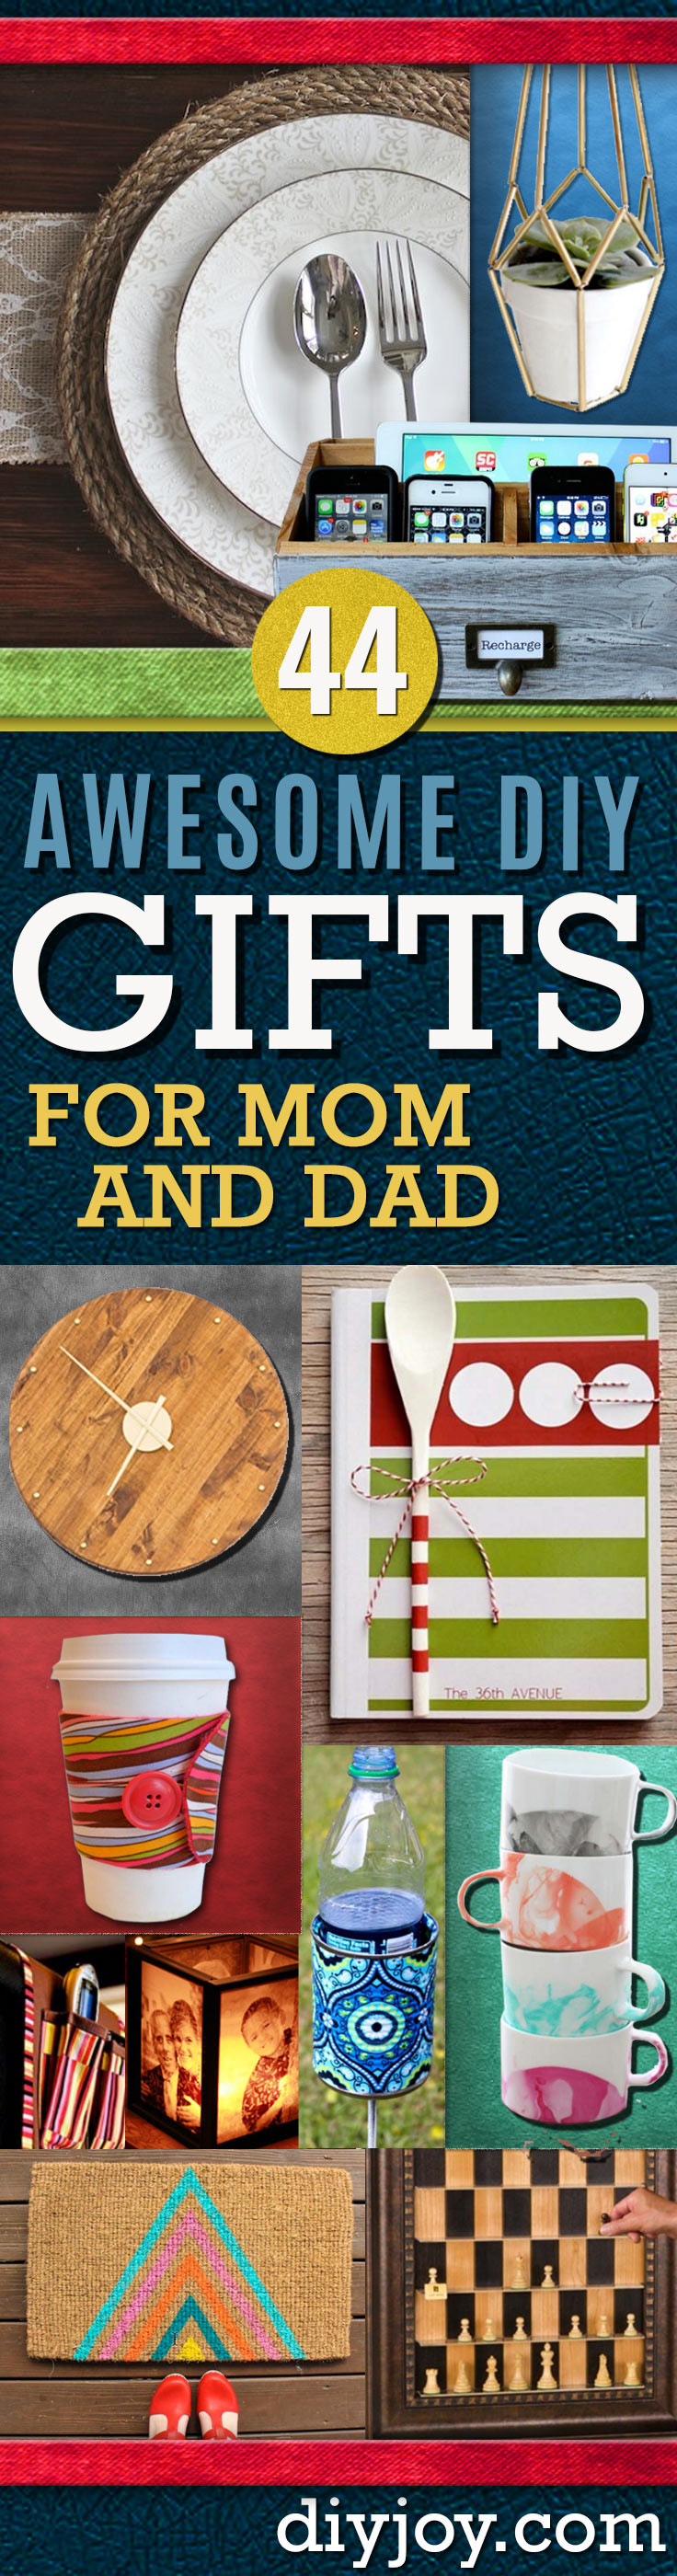 DIY Christmas Gifts For Dad From Daughter
 Awesome DIY Gift Ideas Mom and Dad Will Love